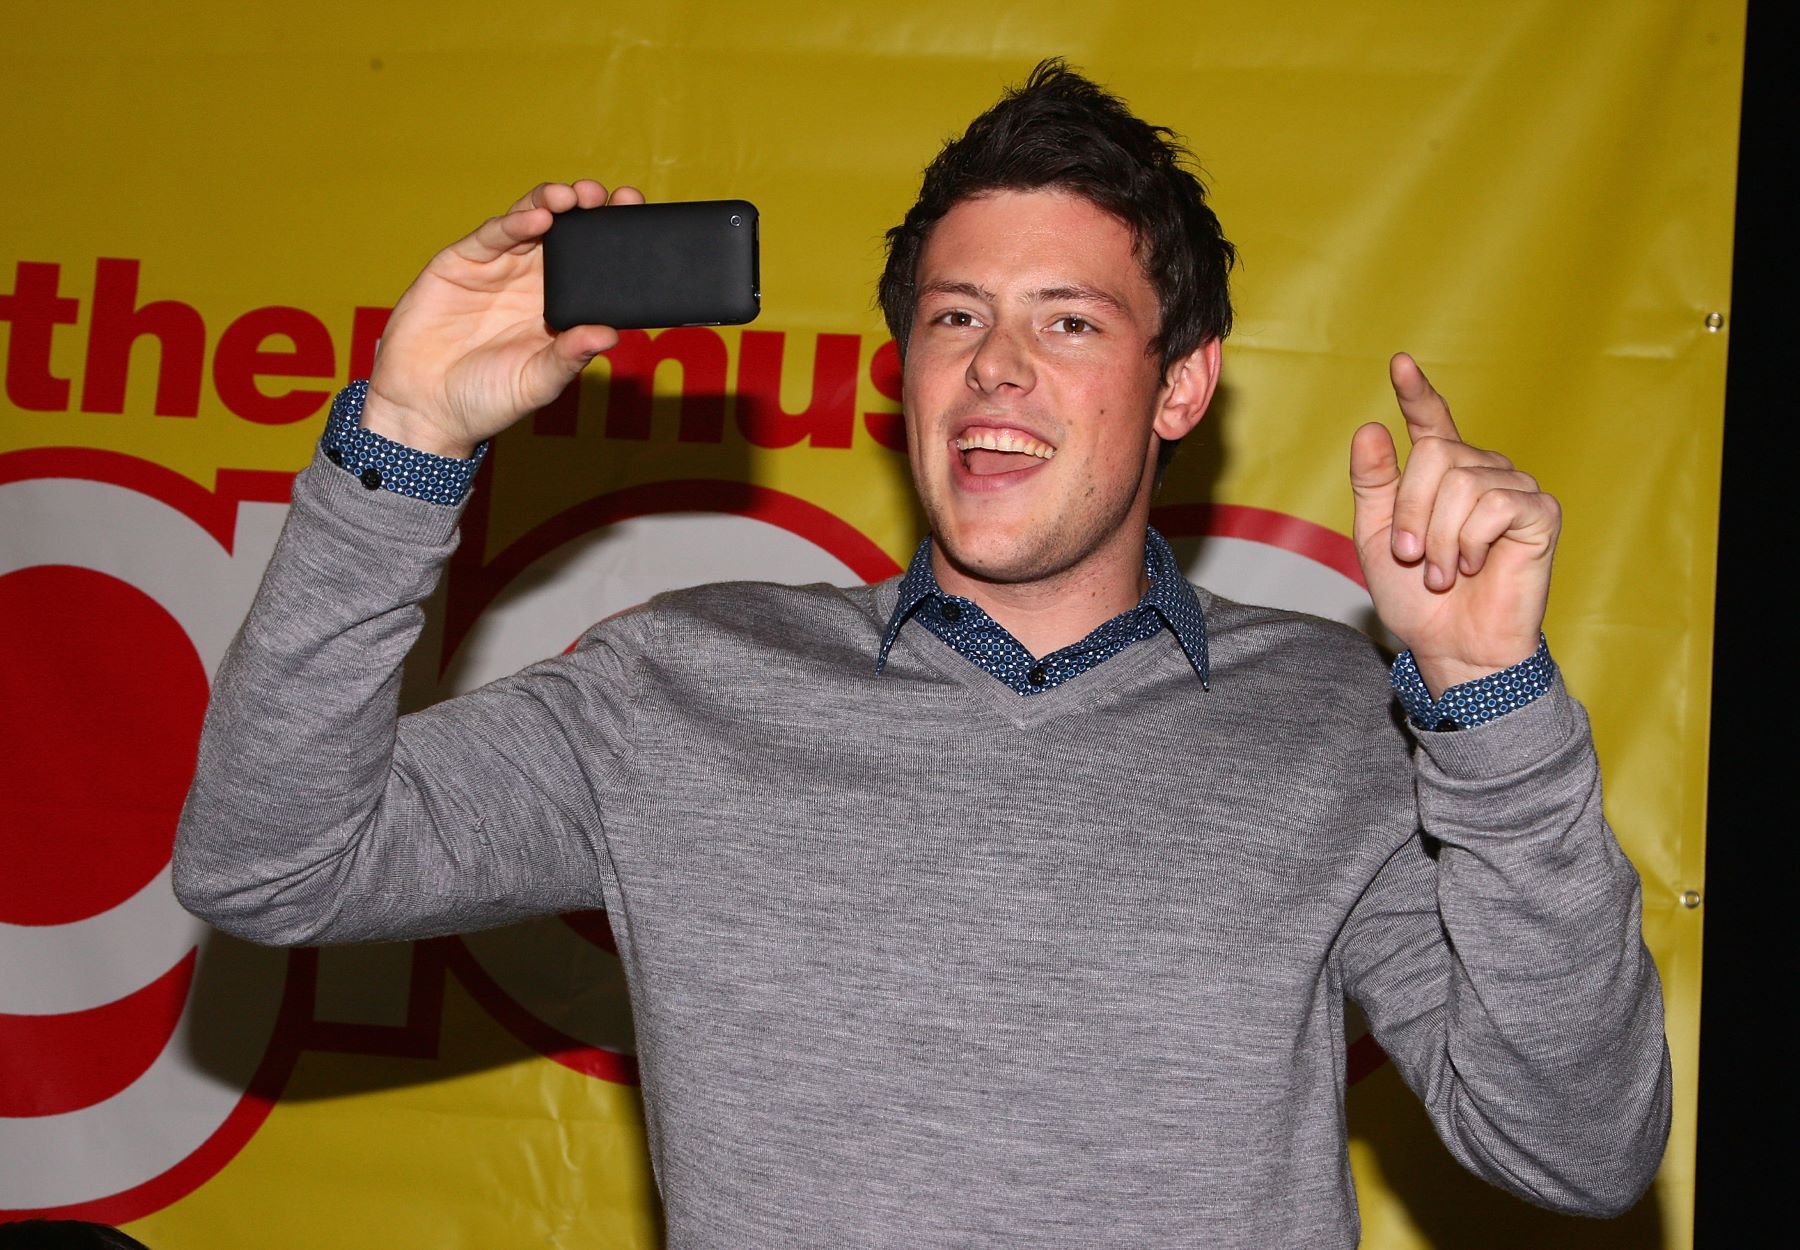 Cory Monteith Was Invaluable To Glee. Where Does the Show Go Now?